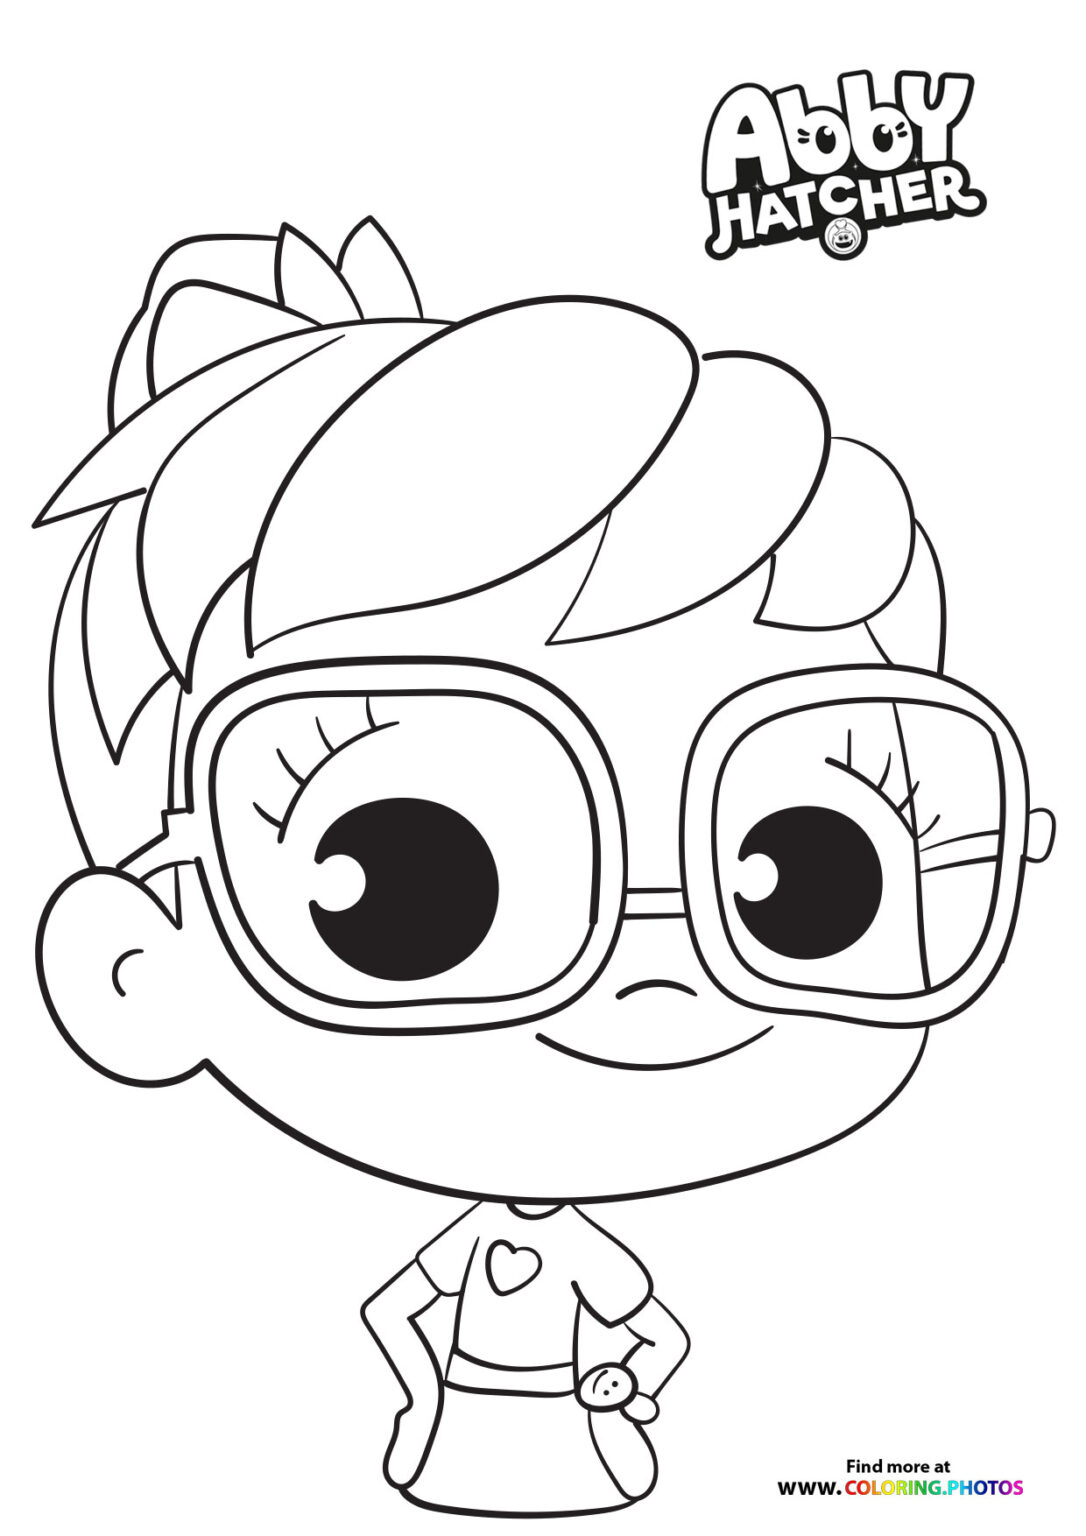 Abby Hatcher Coloring Book Coloring Pages